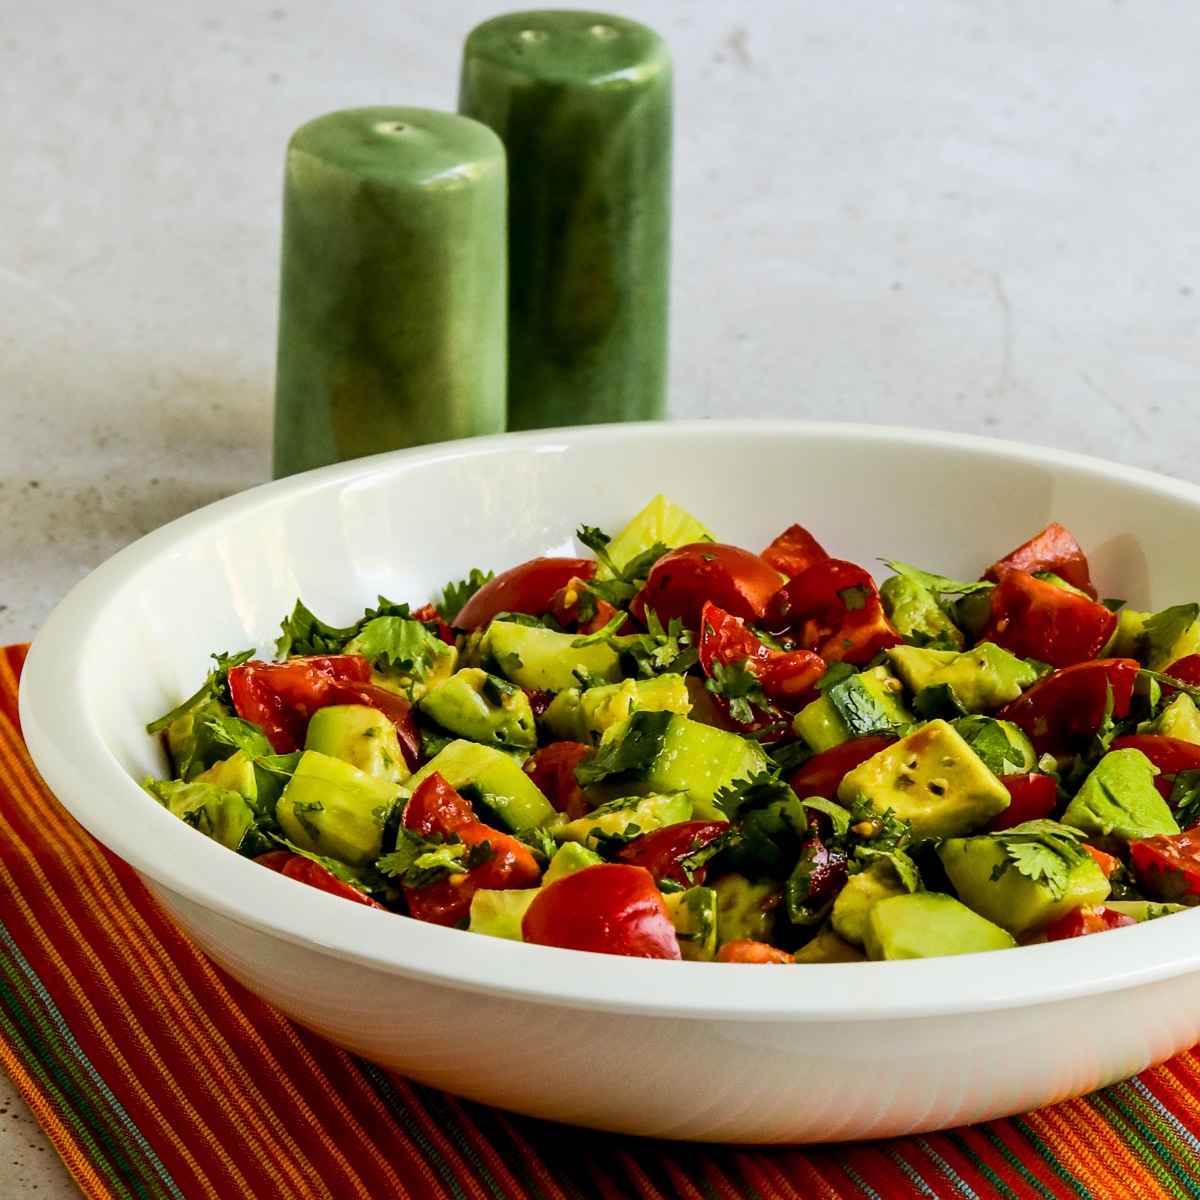 Square image for Tomato Salad with Cucumbers, Avocado, and Cilantro in white bowl.